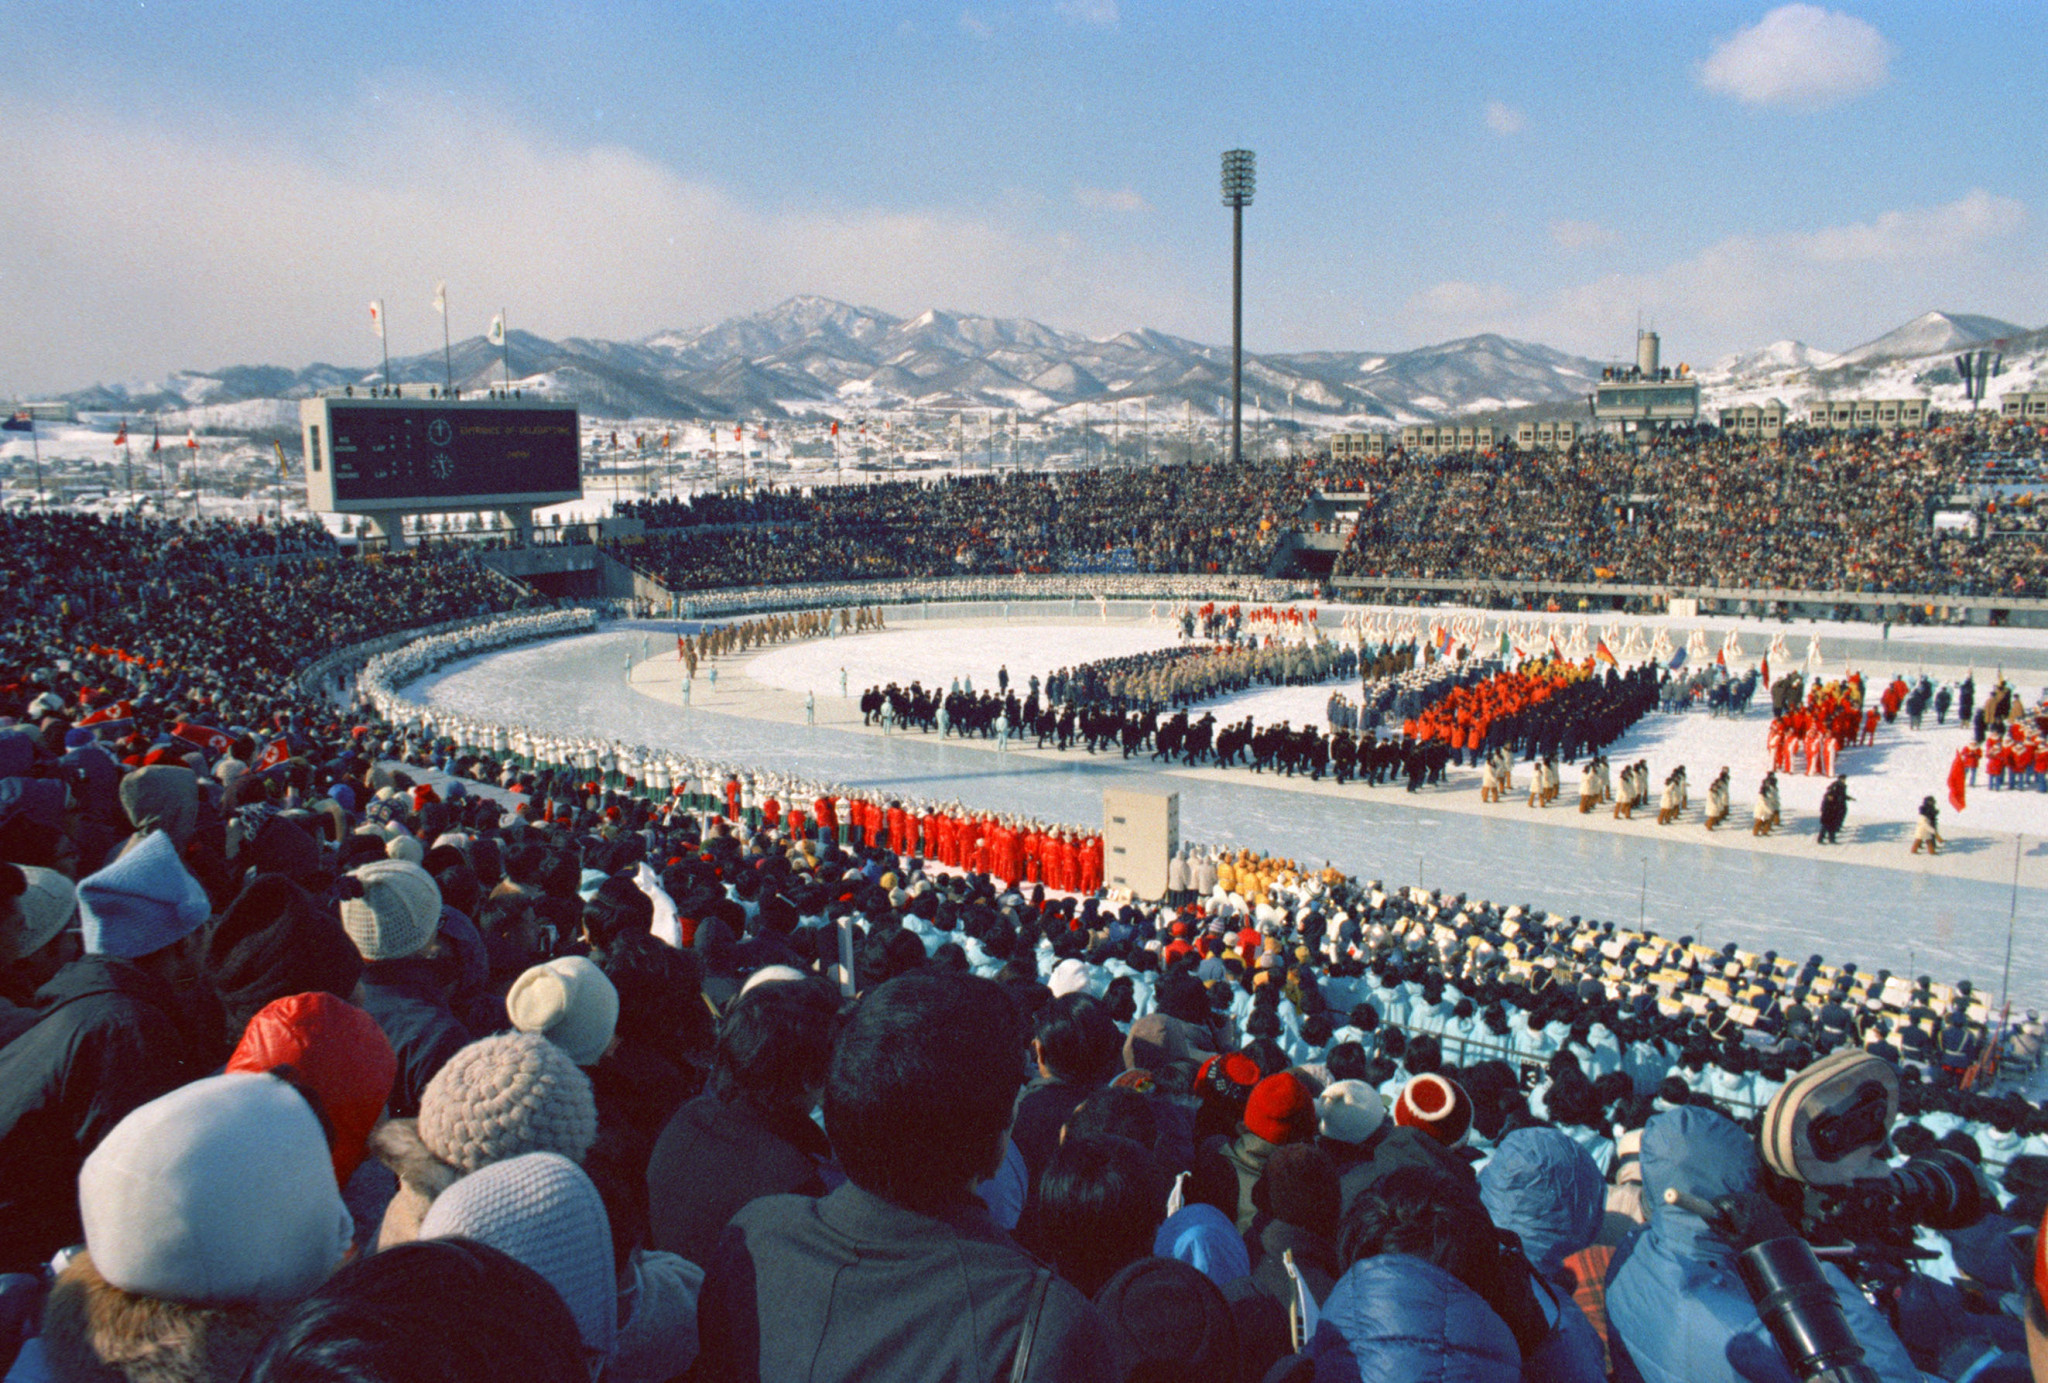 Only Sapporo, which hosted the 1972 Games, has been labelled a 